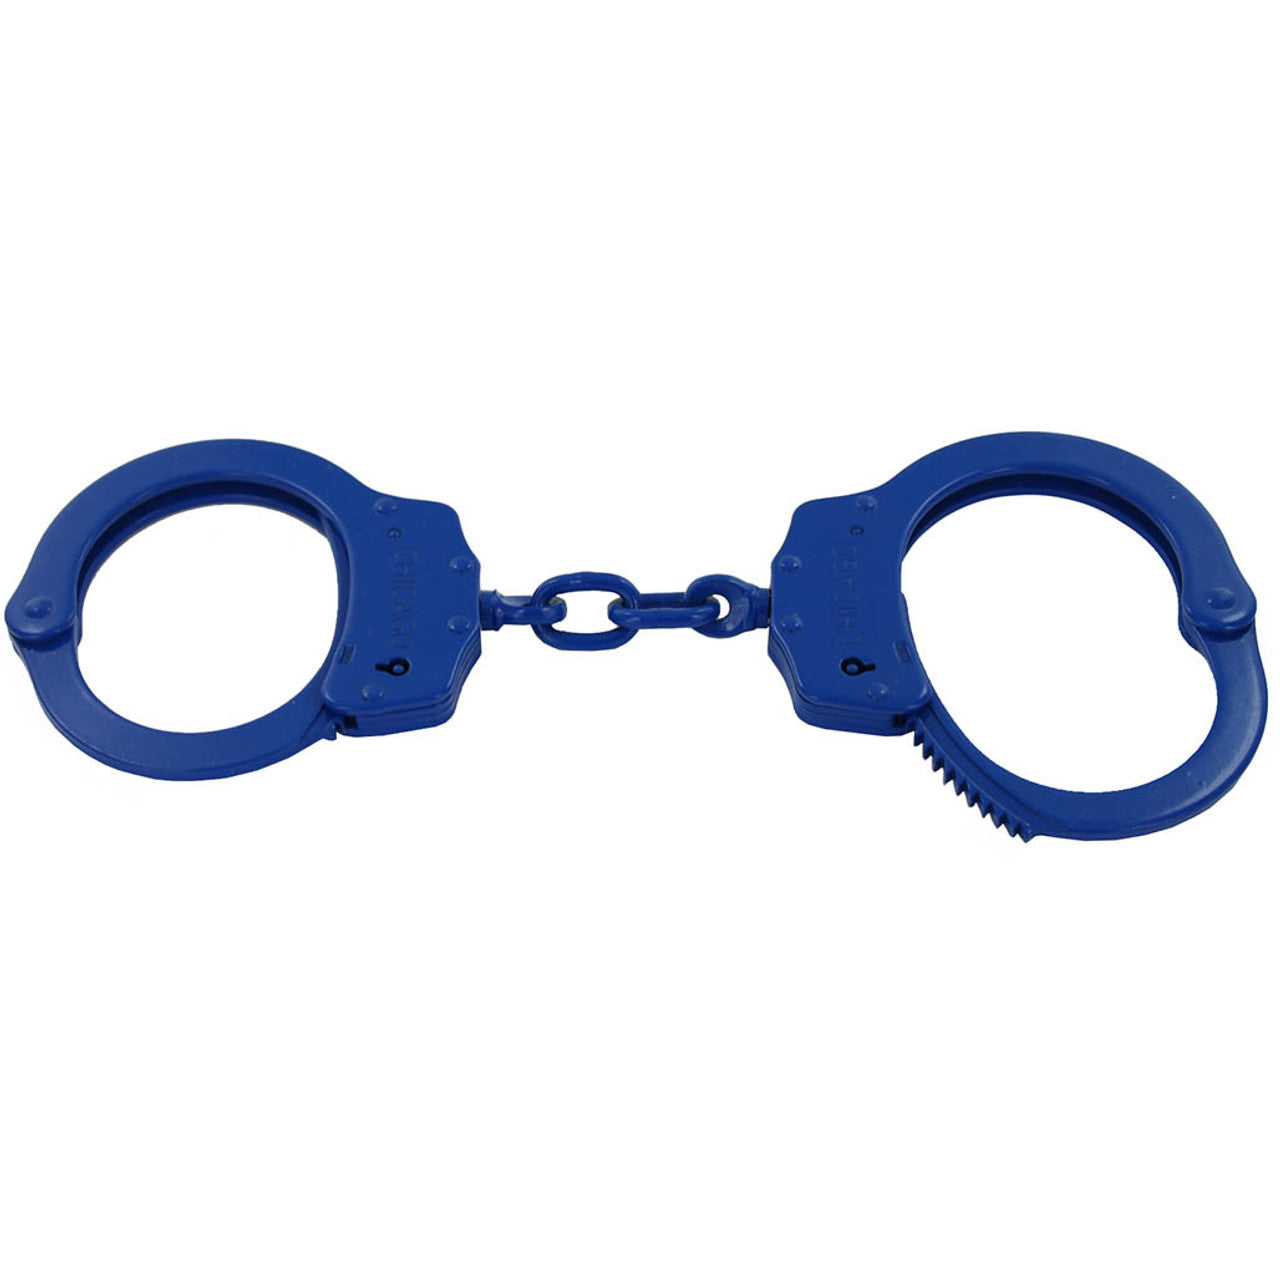 Chicago Double-Locking Handcuffs in Blue